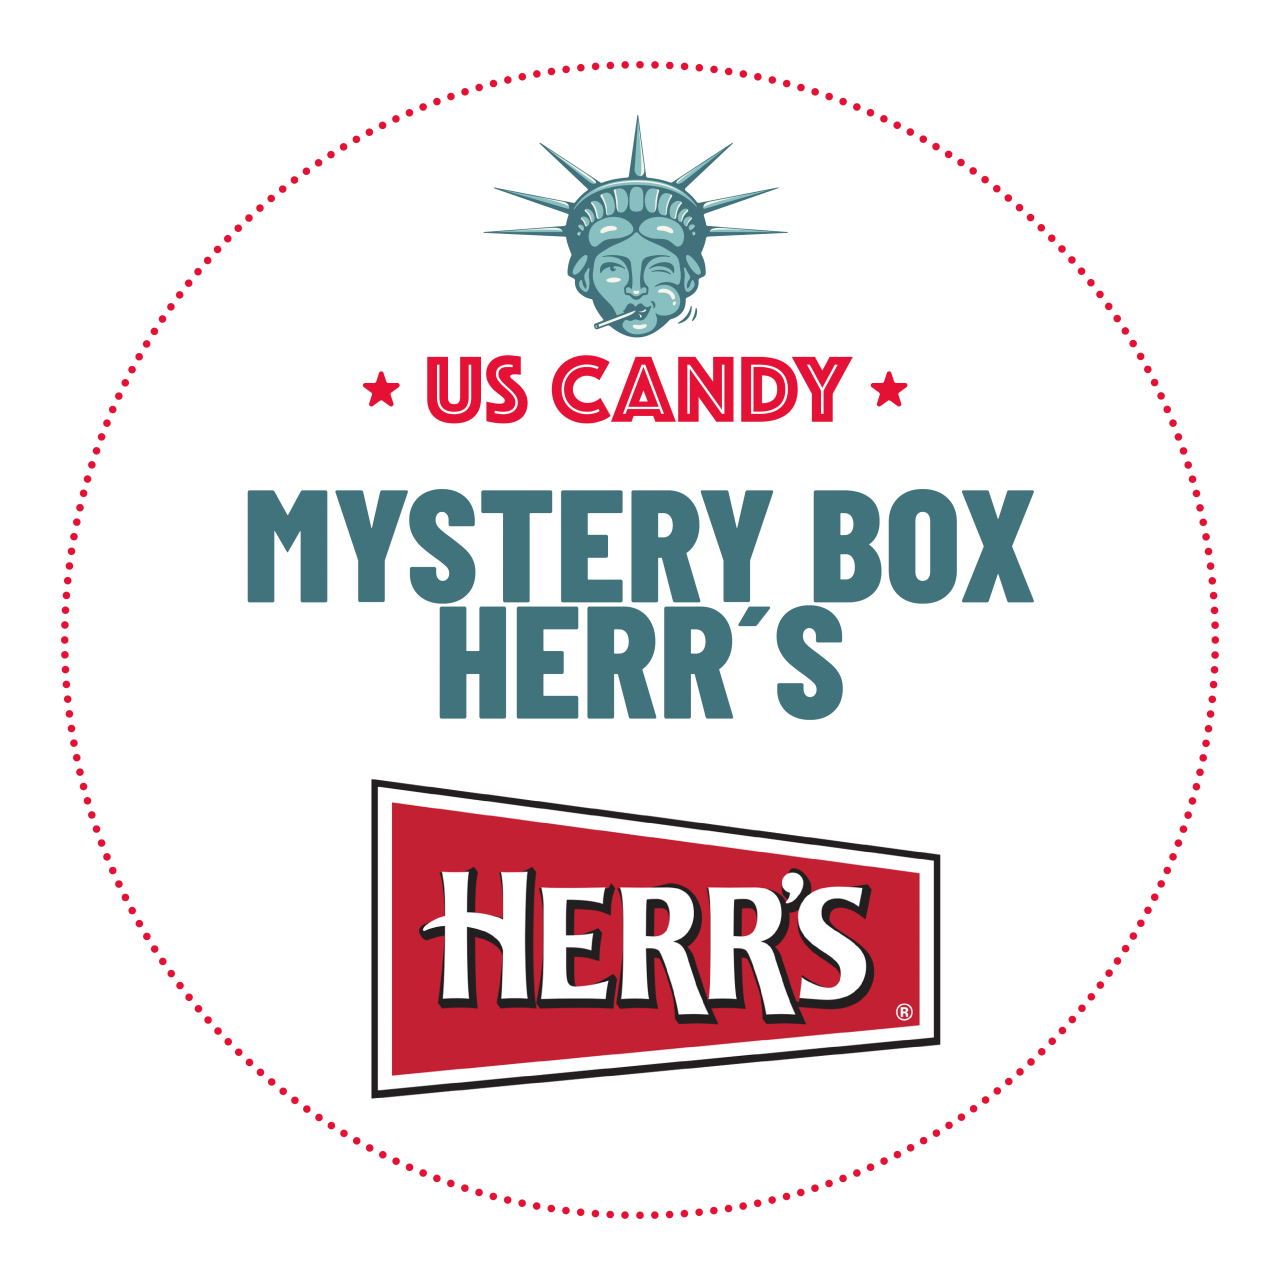 US Candy Mystery Box Herr’s